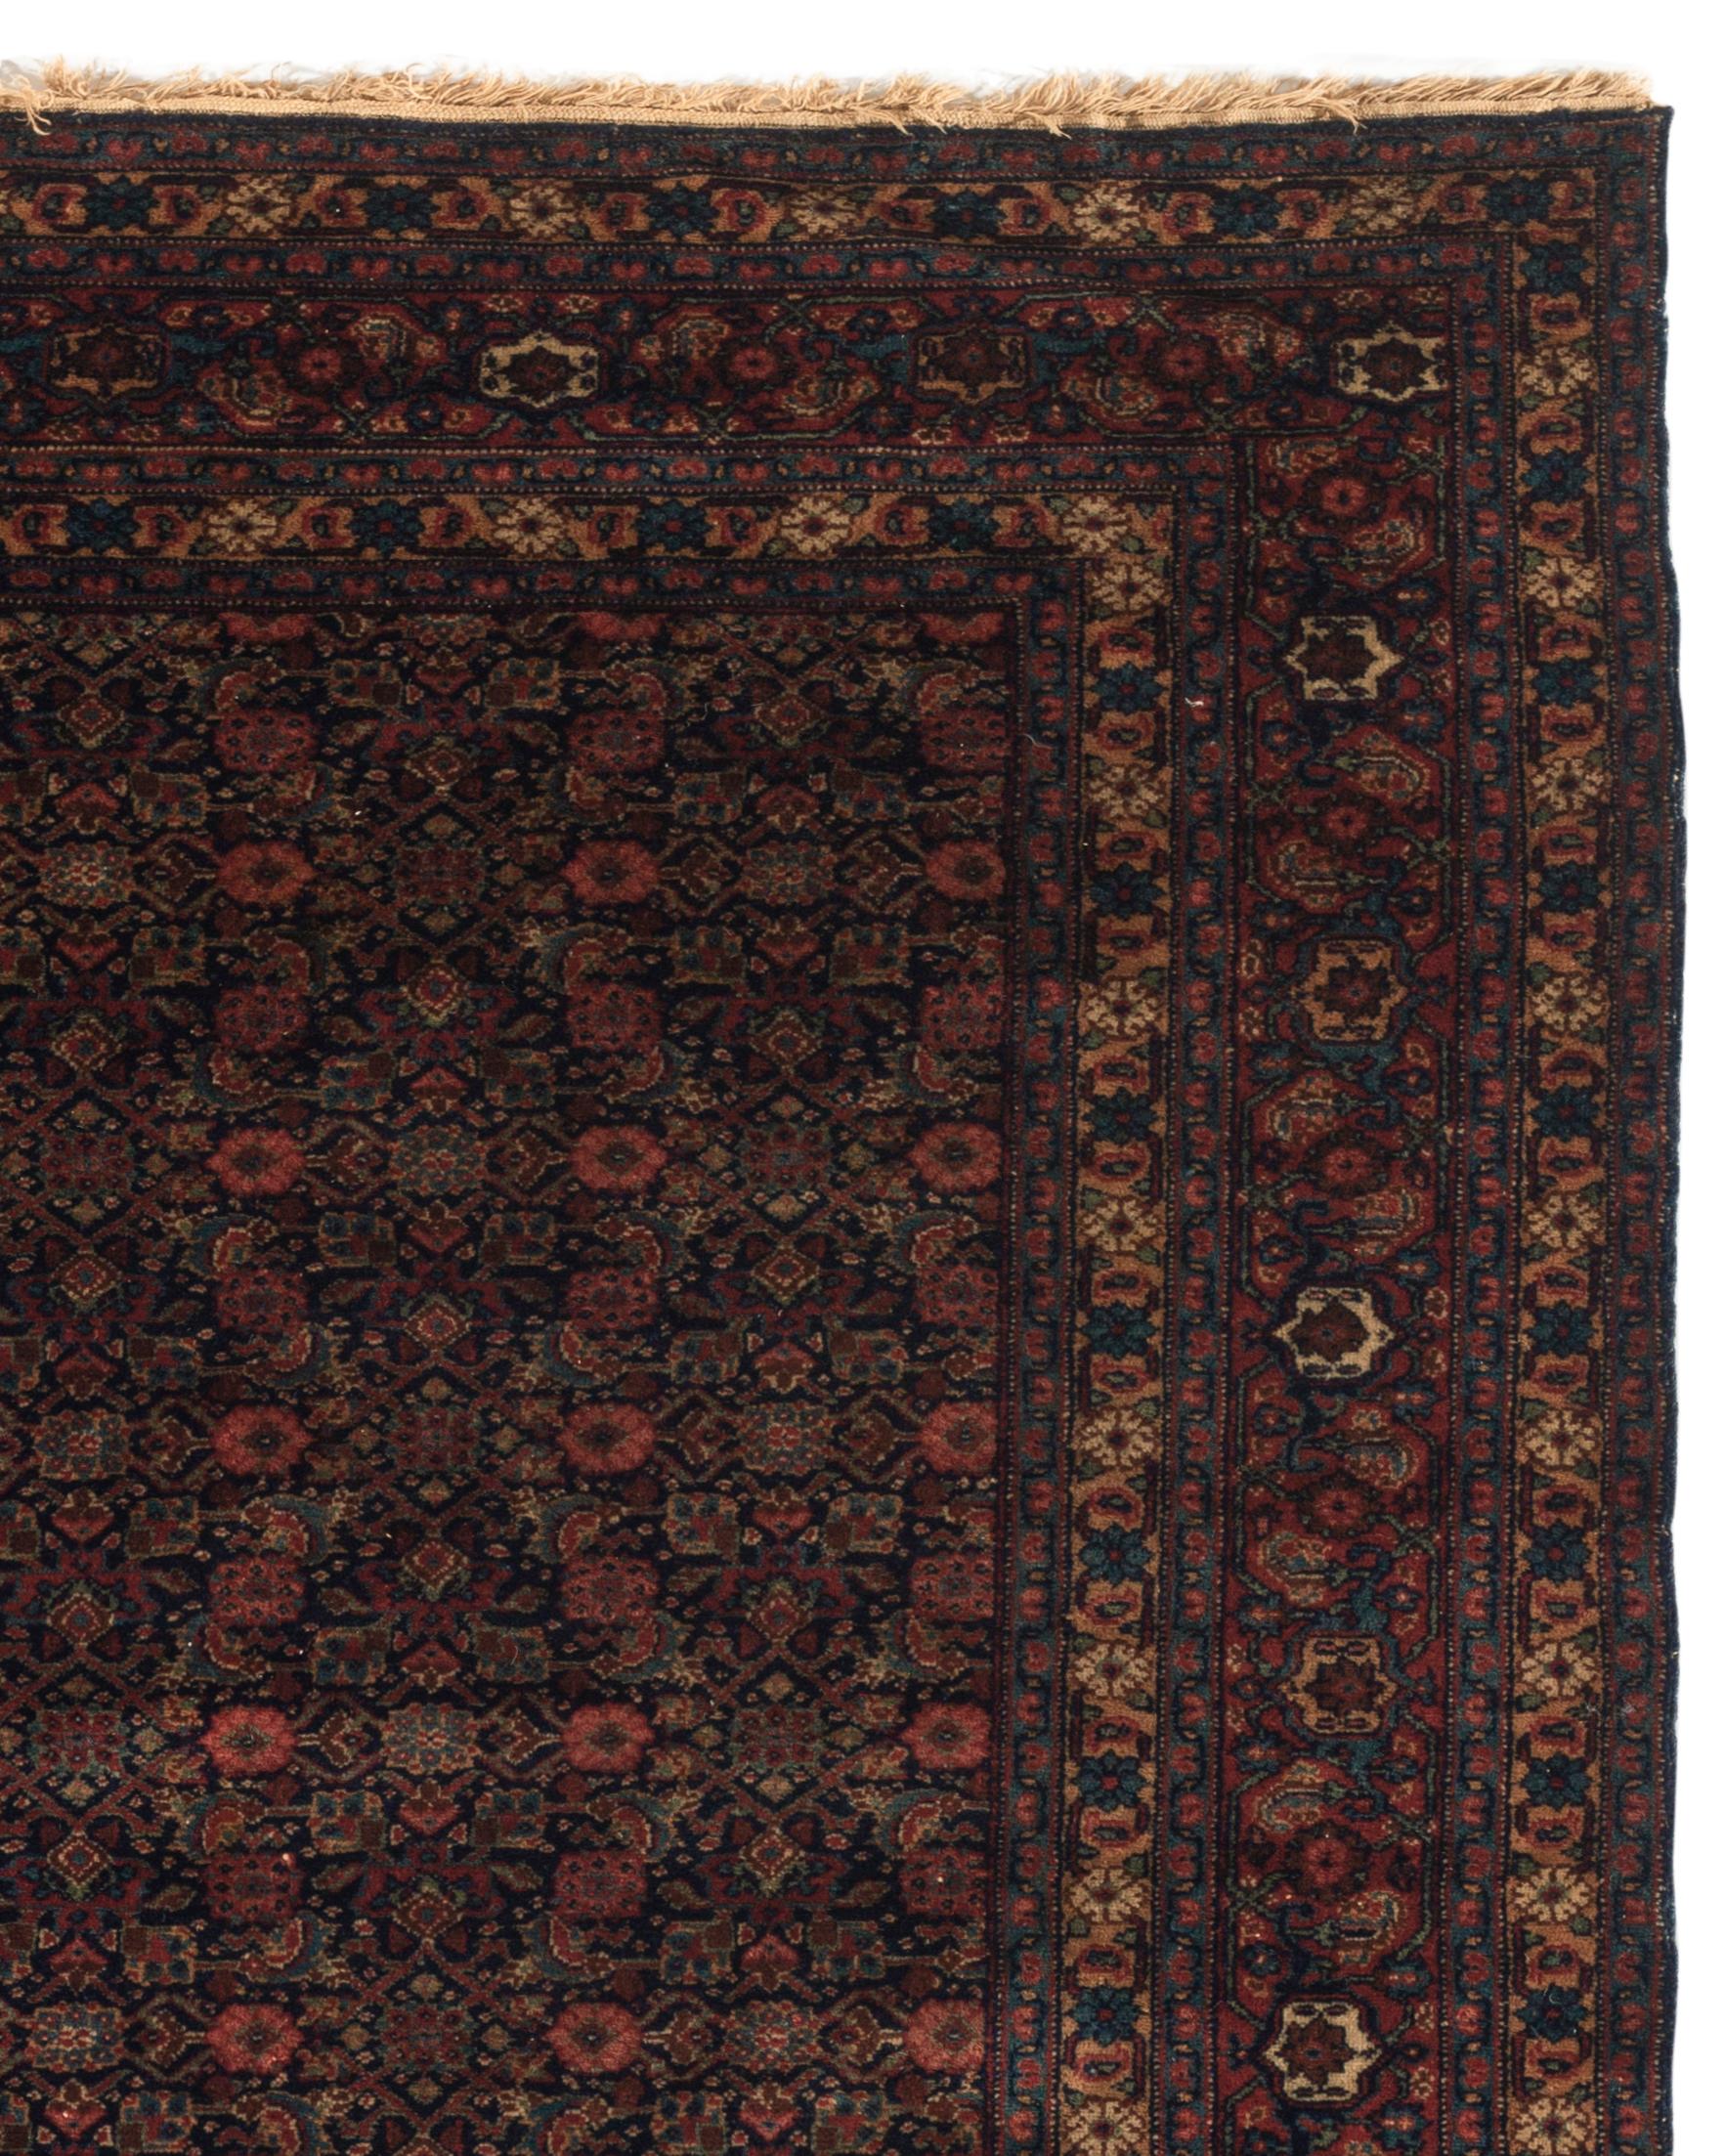 Hand-Woven Antique Persian Senneh Rug, circa 1900 One of a Pair For Sale